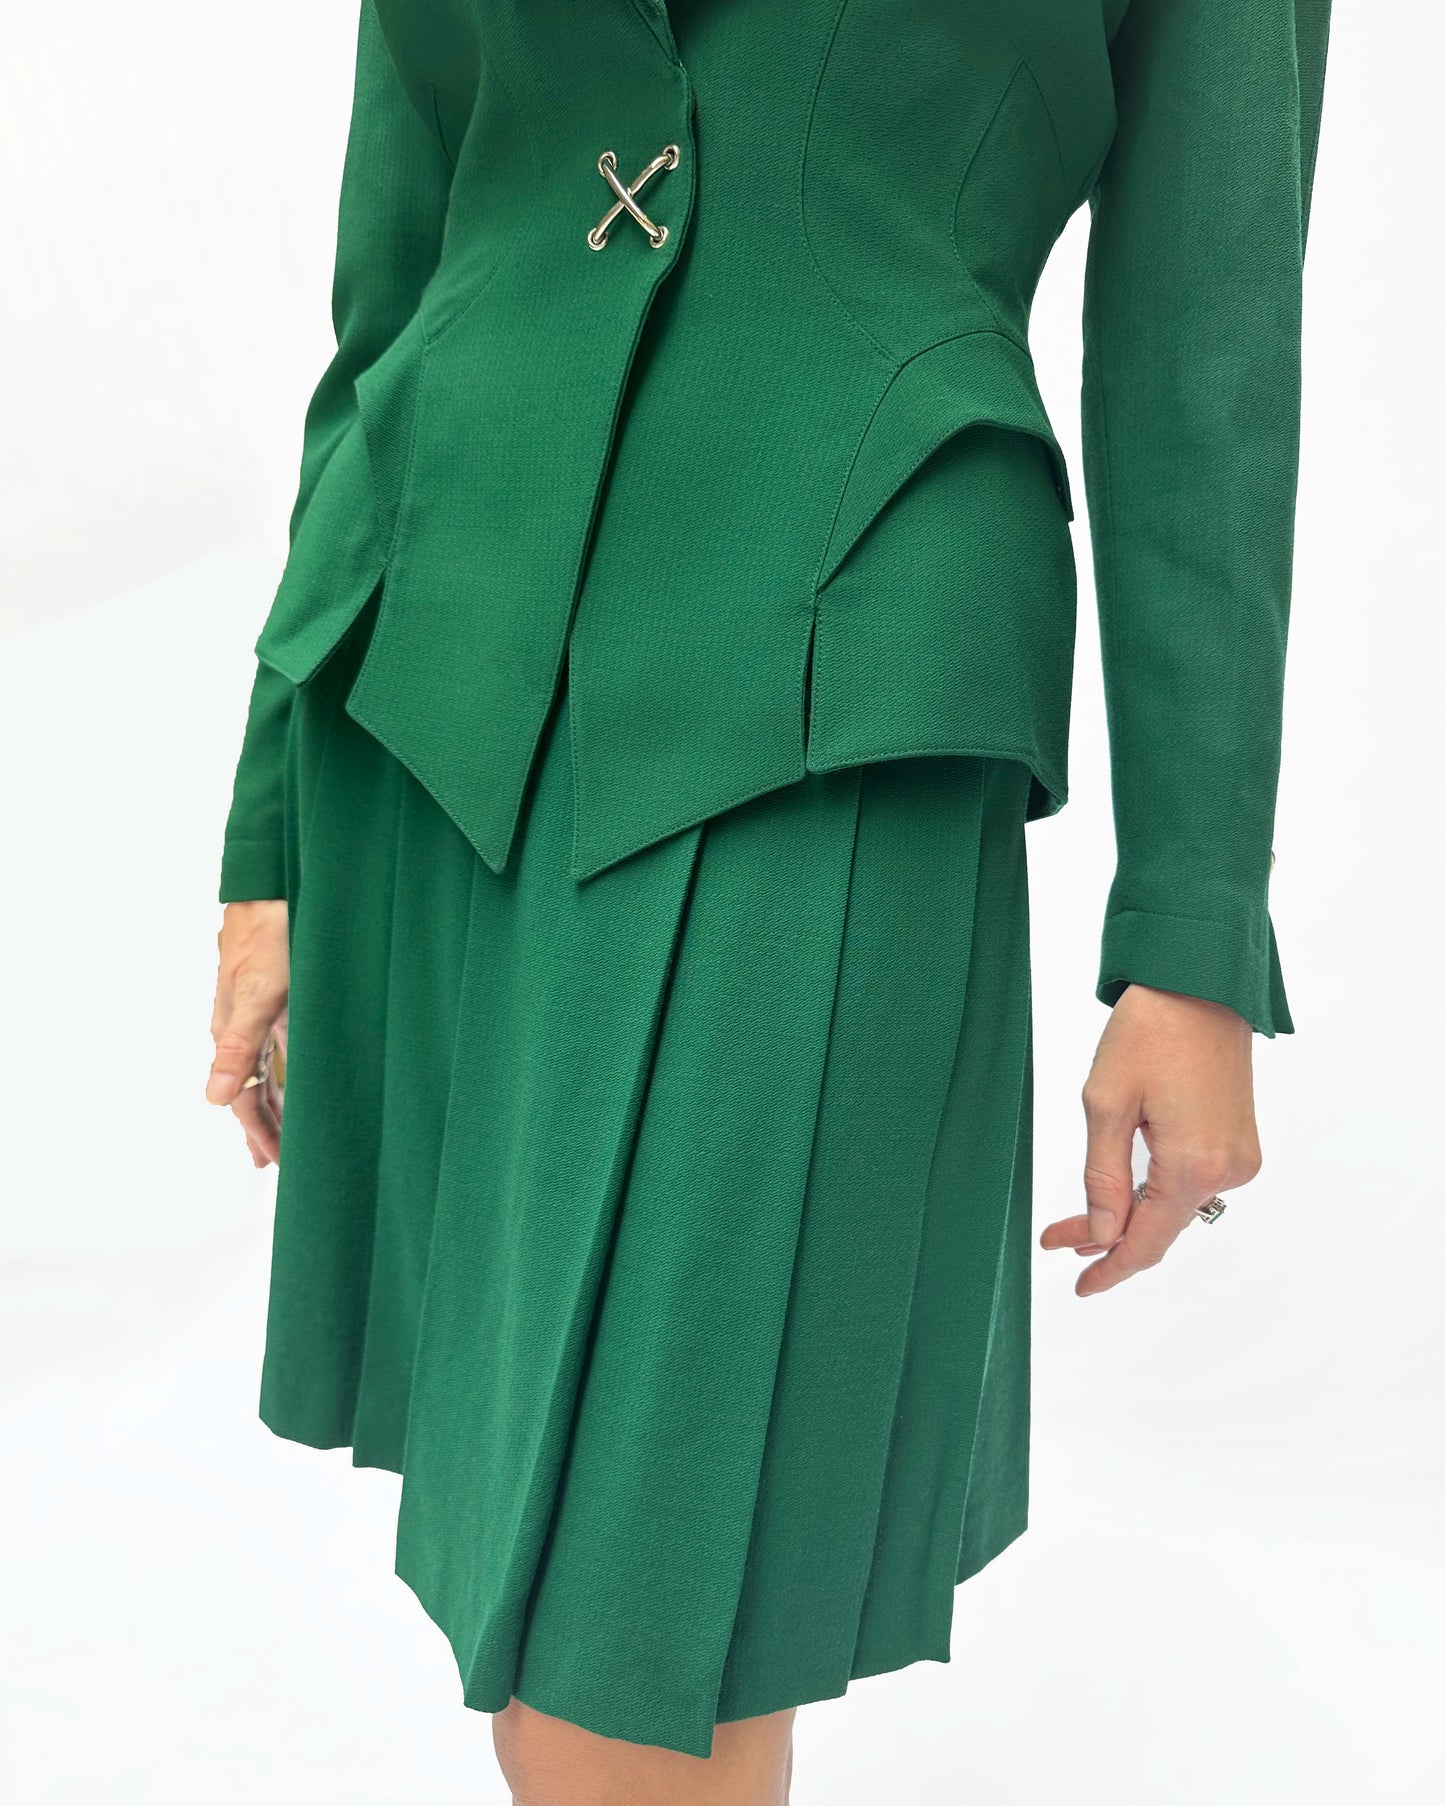 VINTAGE THIERRY MUGLER FALL 1992 EMERALD JACKET + PLEATED SKIRT SUIT